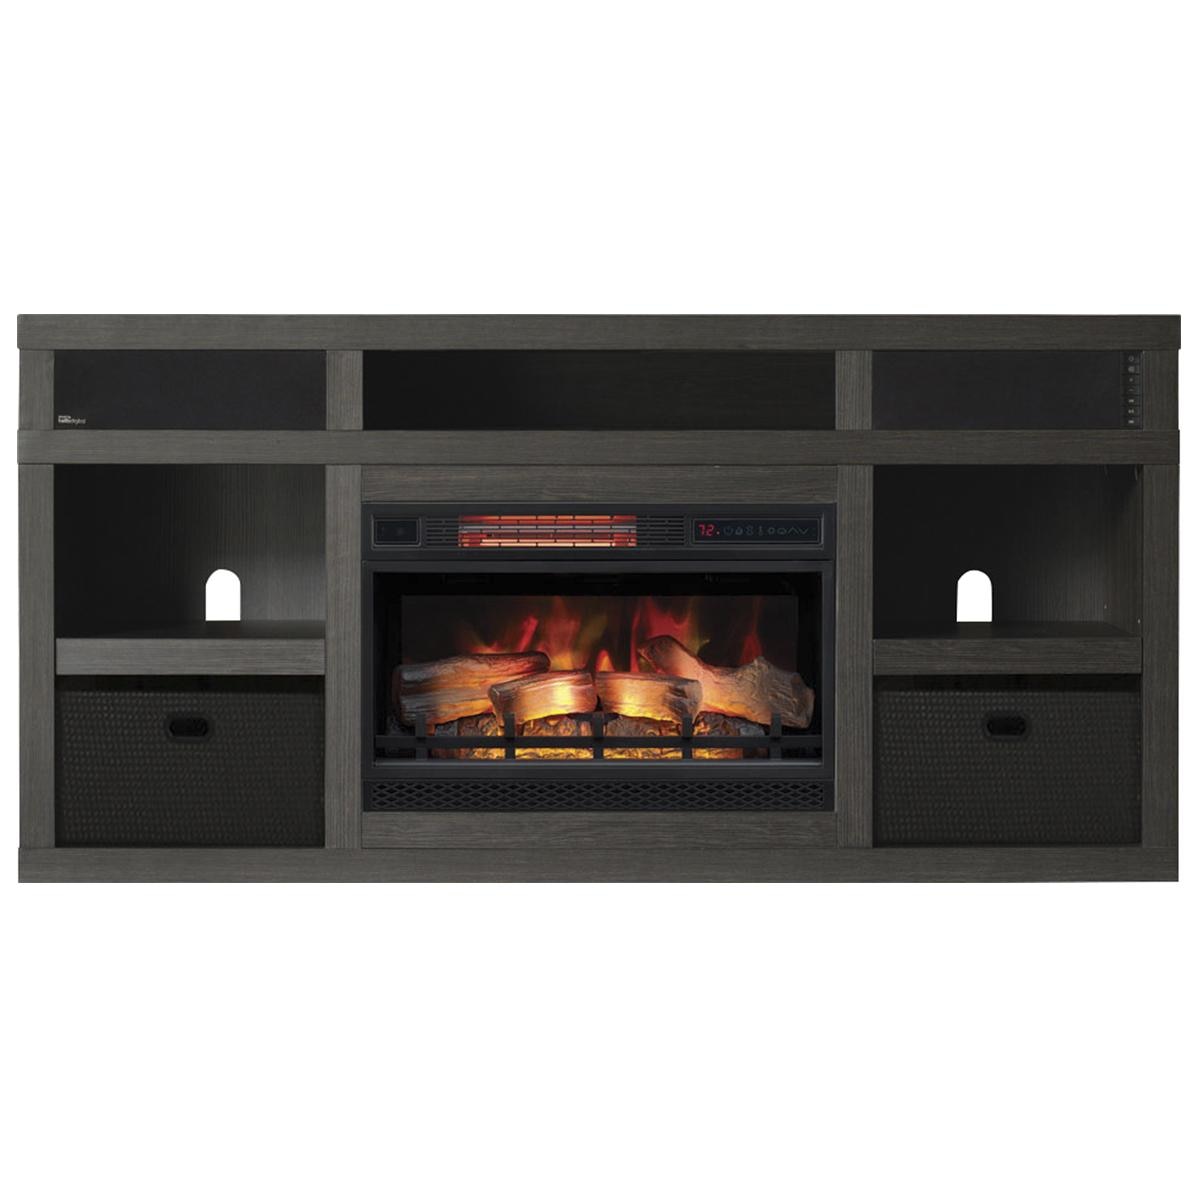 Fire and Ice Fireplace Elegant Fabio Flames Greatlin 3 Piece Fireplace Entertainment Wall